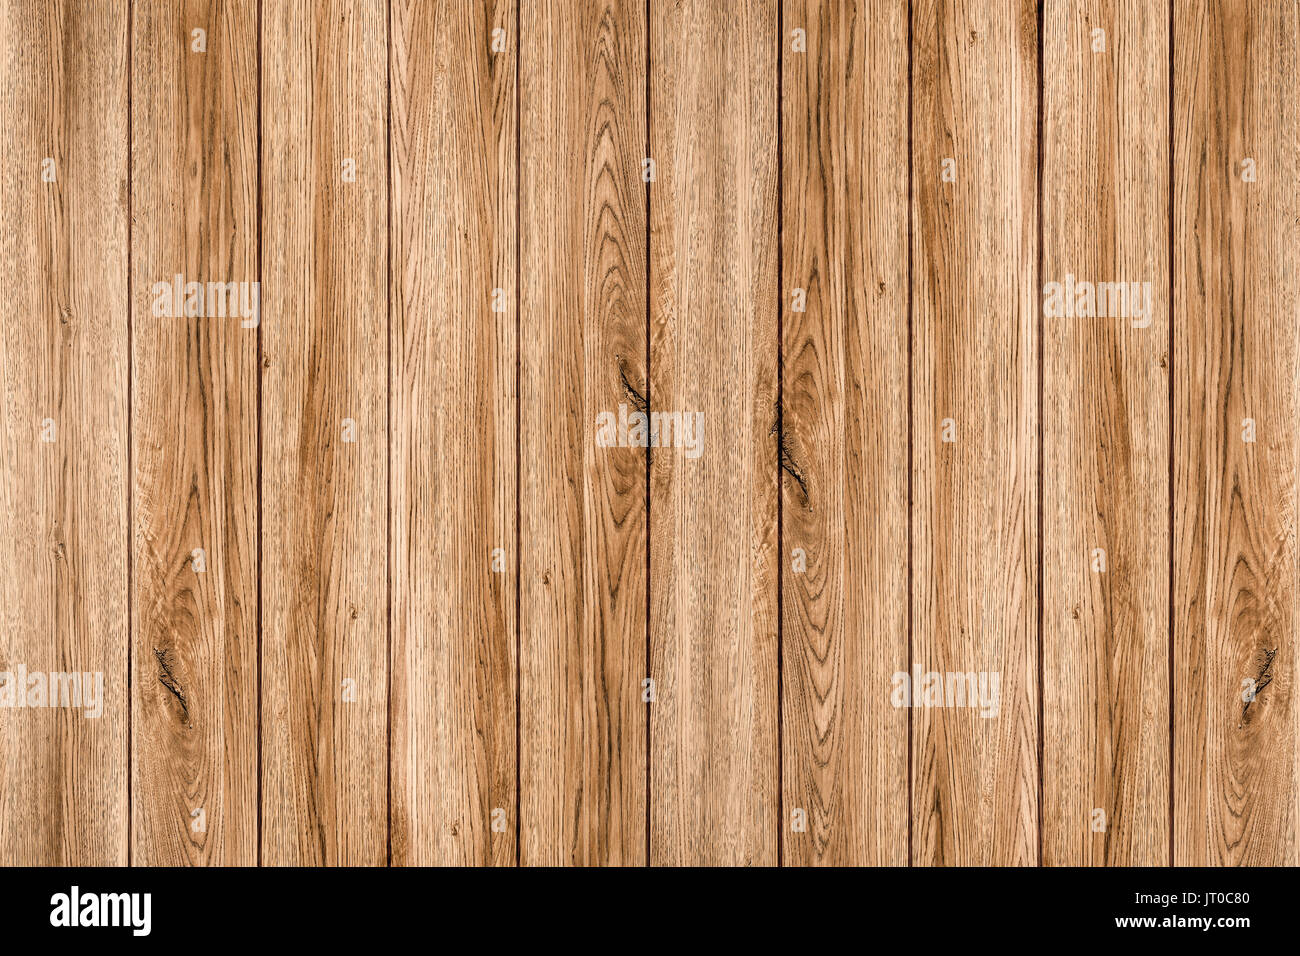 wooden background or timber wood background Stock Photo